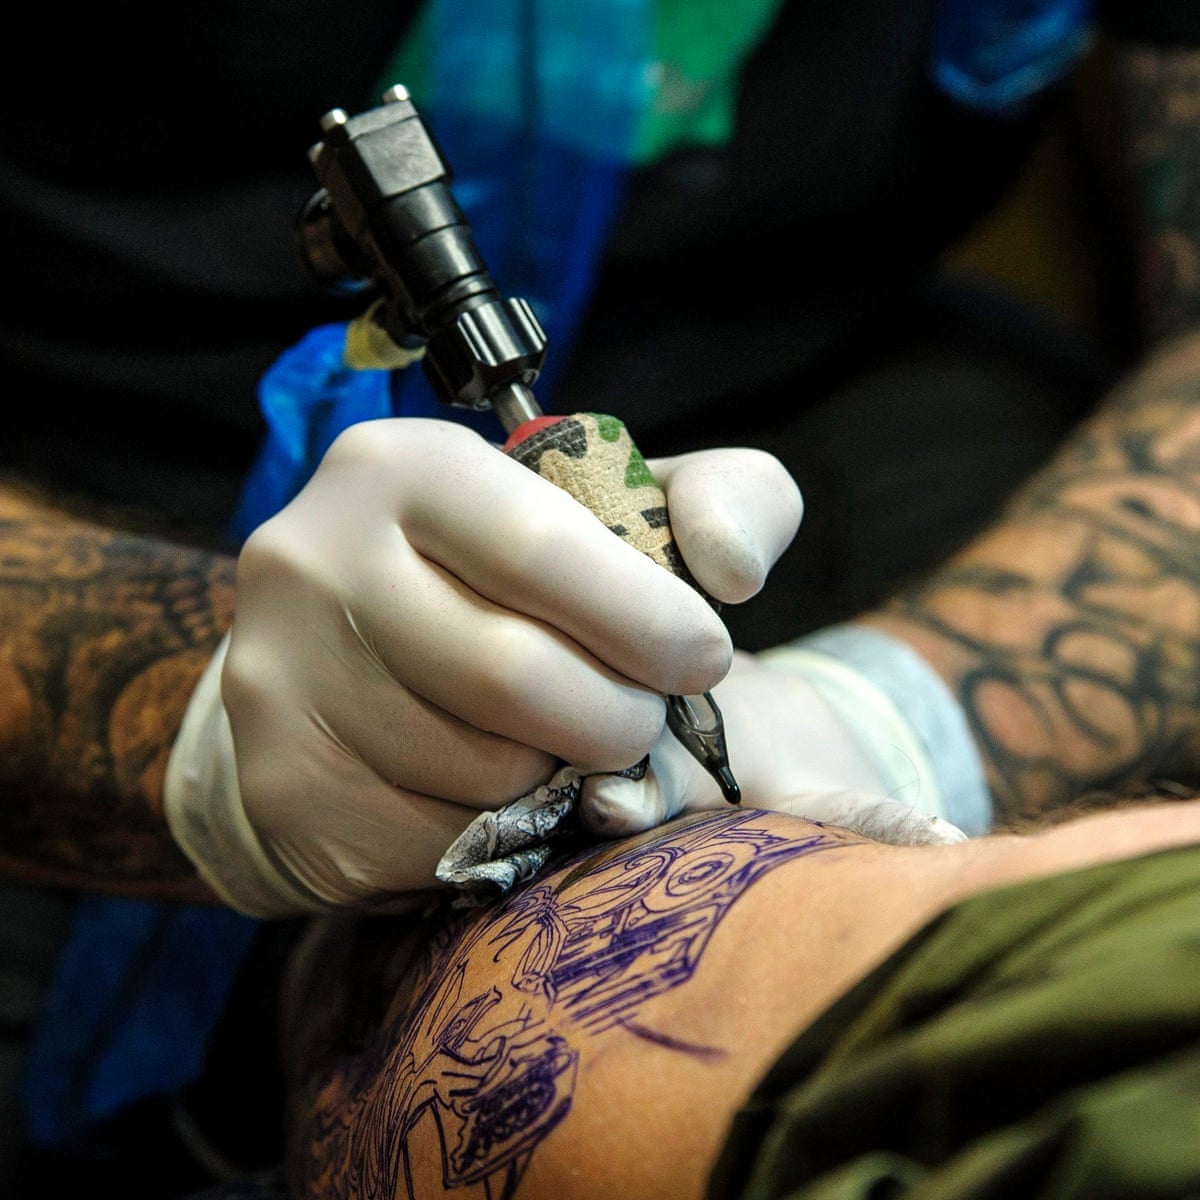 Ink-credible: share stories of tattoo discrimination at work | Diversity |  The Guardian